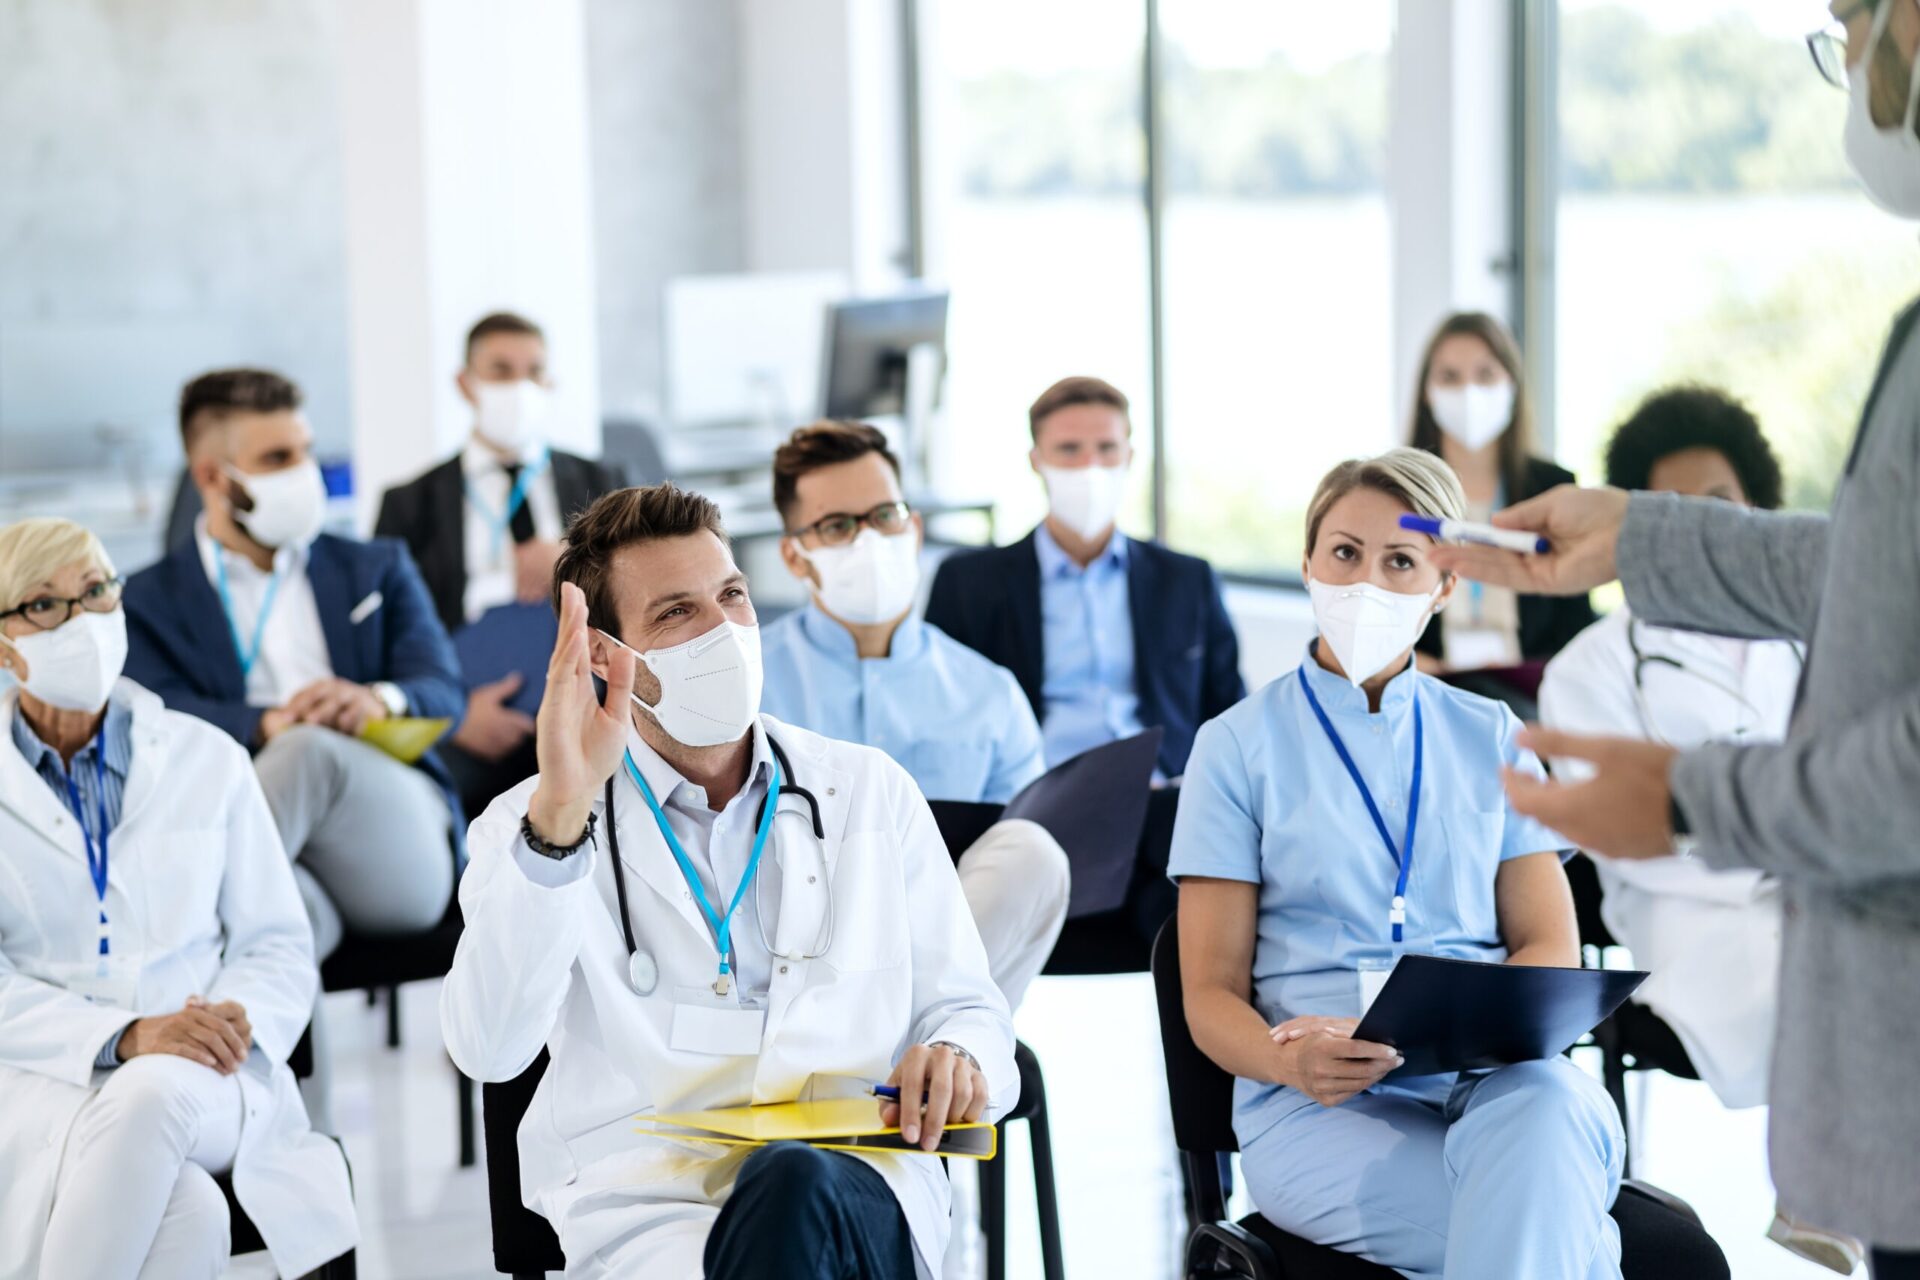 Happy doctor with protective face mask raising hand to ask a question while attending educational event.